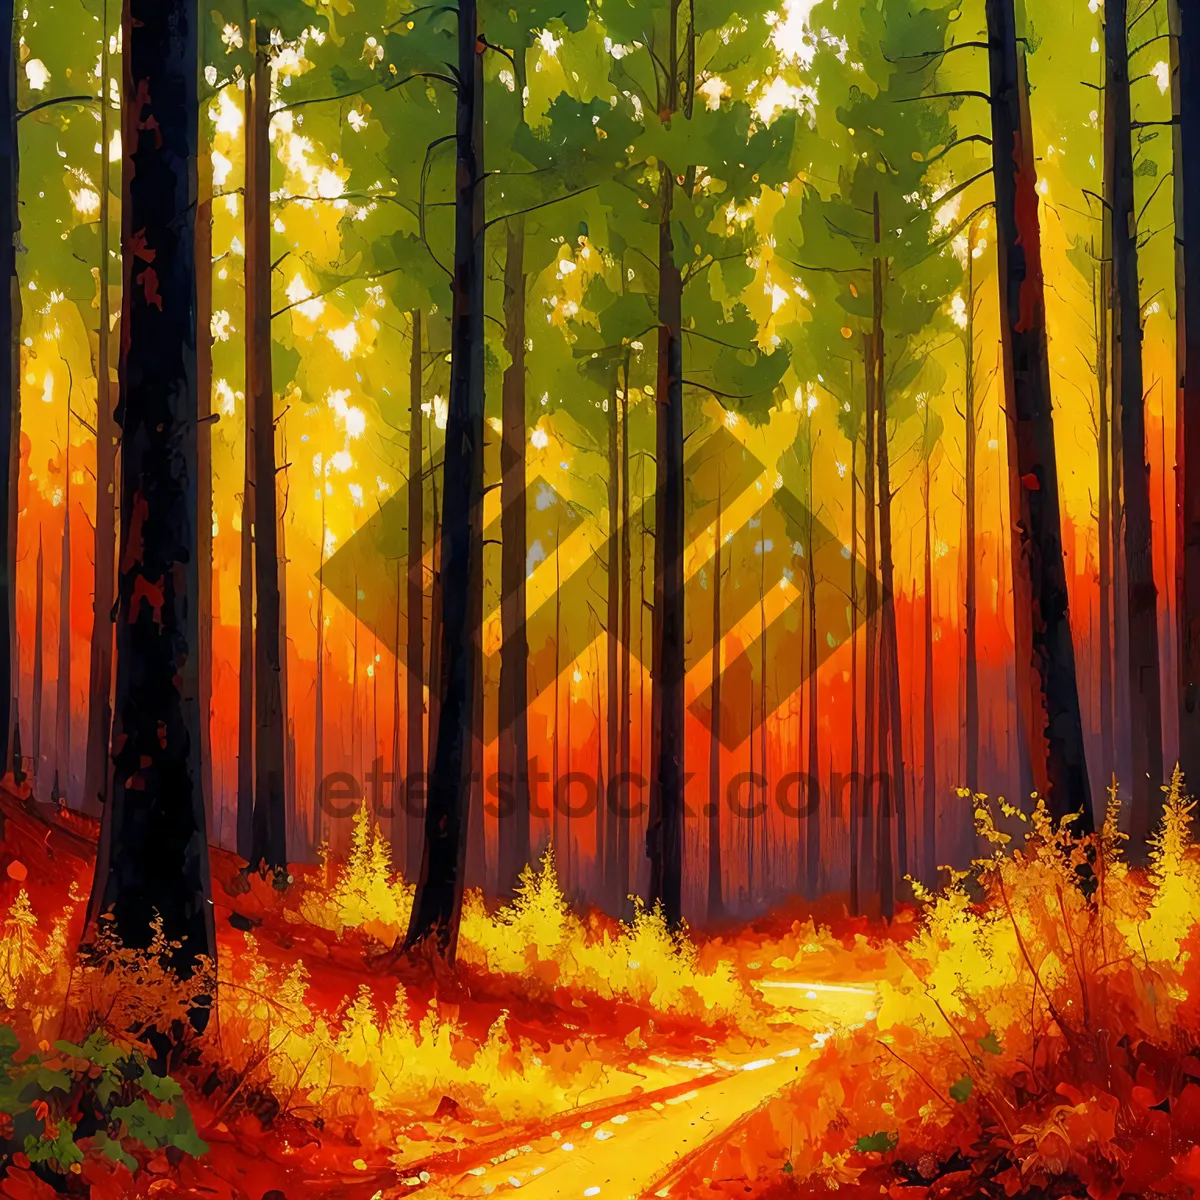 Picture of Autumn Sunlit Forest: Foliage Blankets the Woods